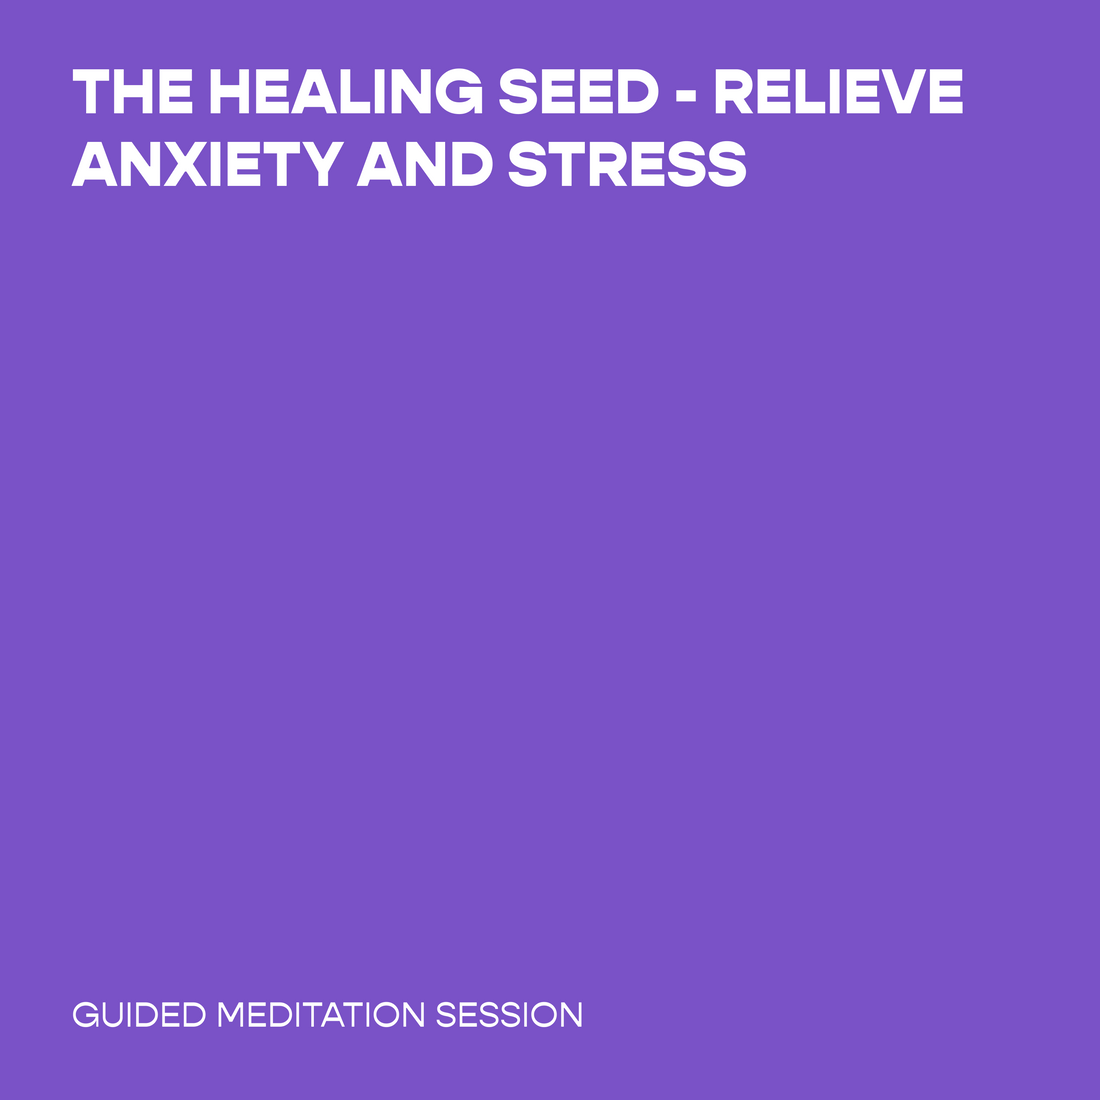 The Healing Seed - Relieve Anxiety and Stress